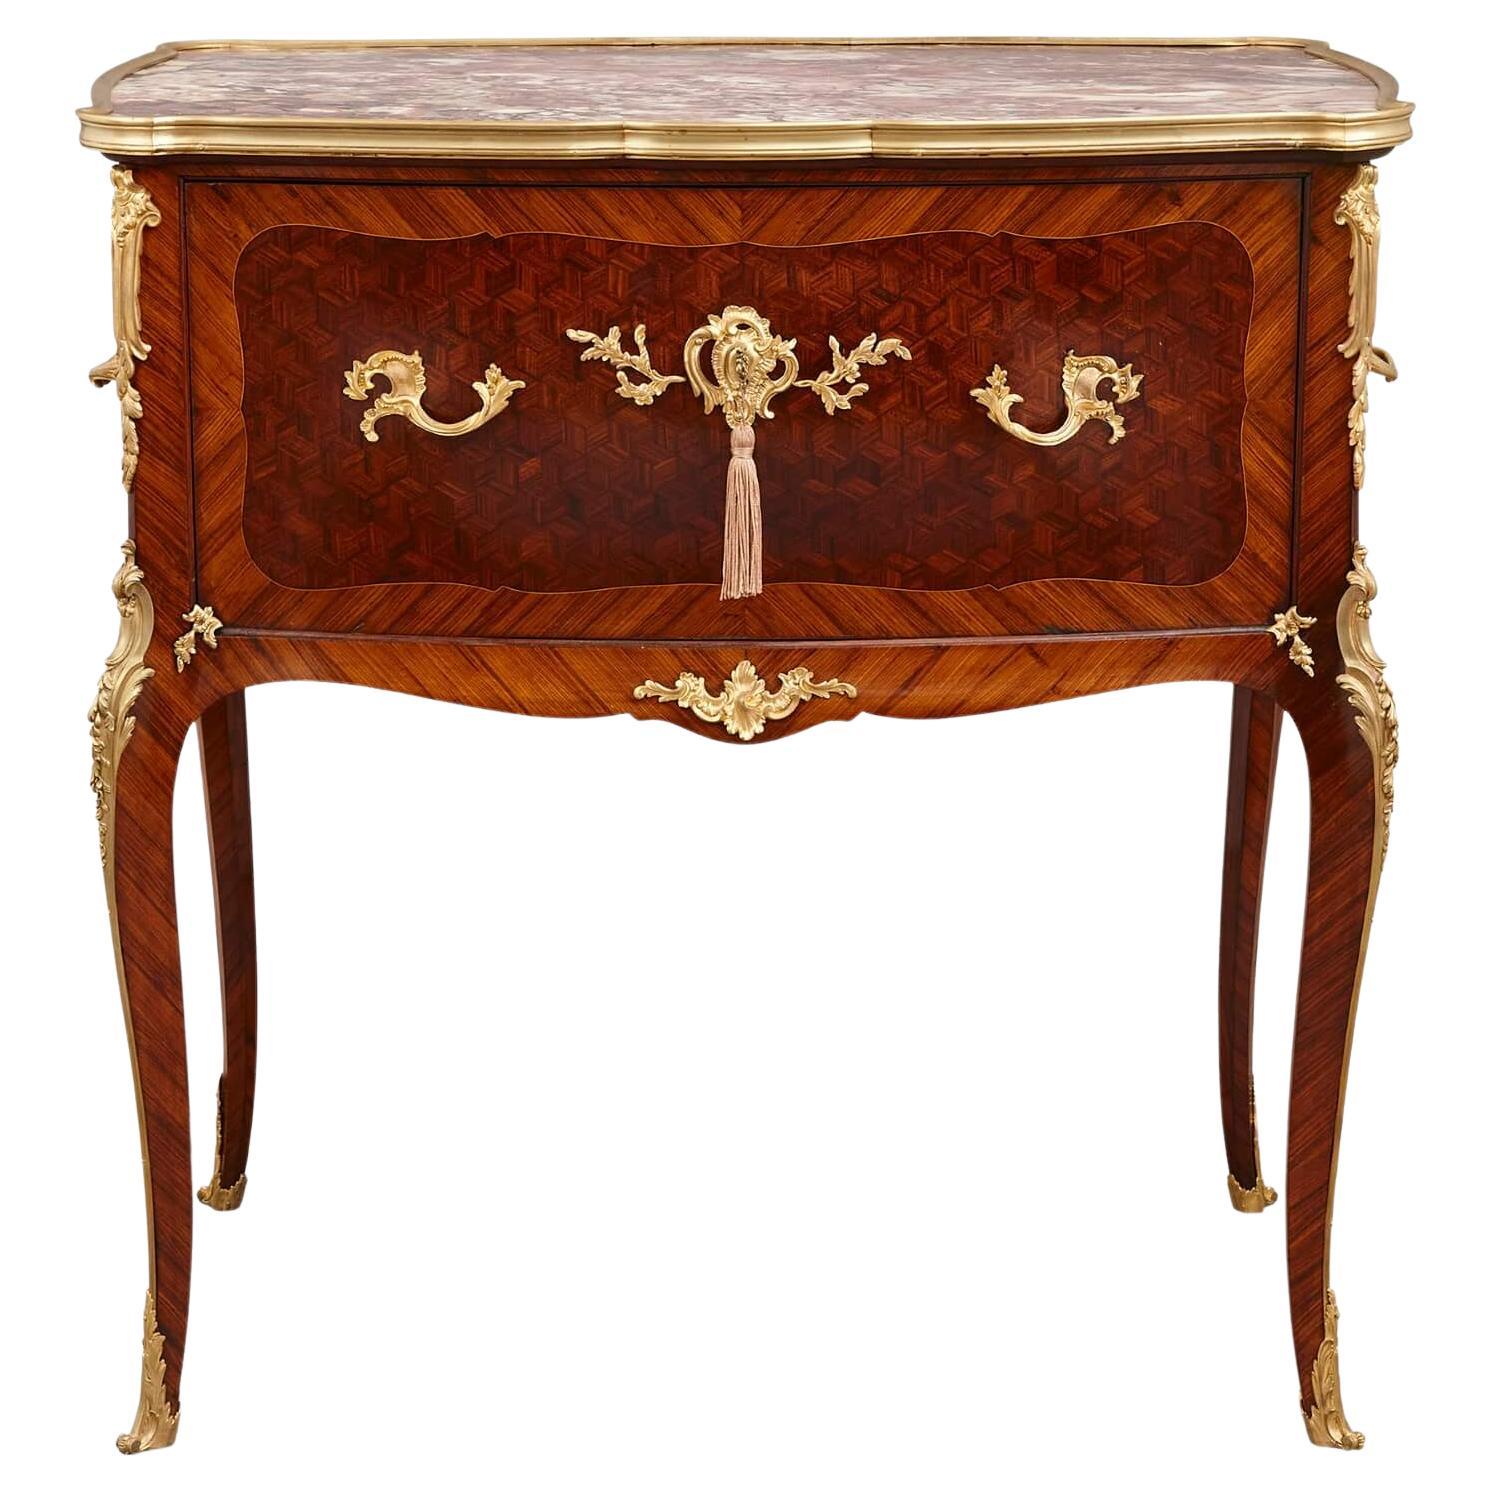 Ormolu, Kingwood, Bois Satine and Parquetry Side Table by François Linke For Sale